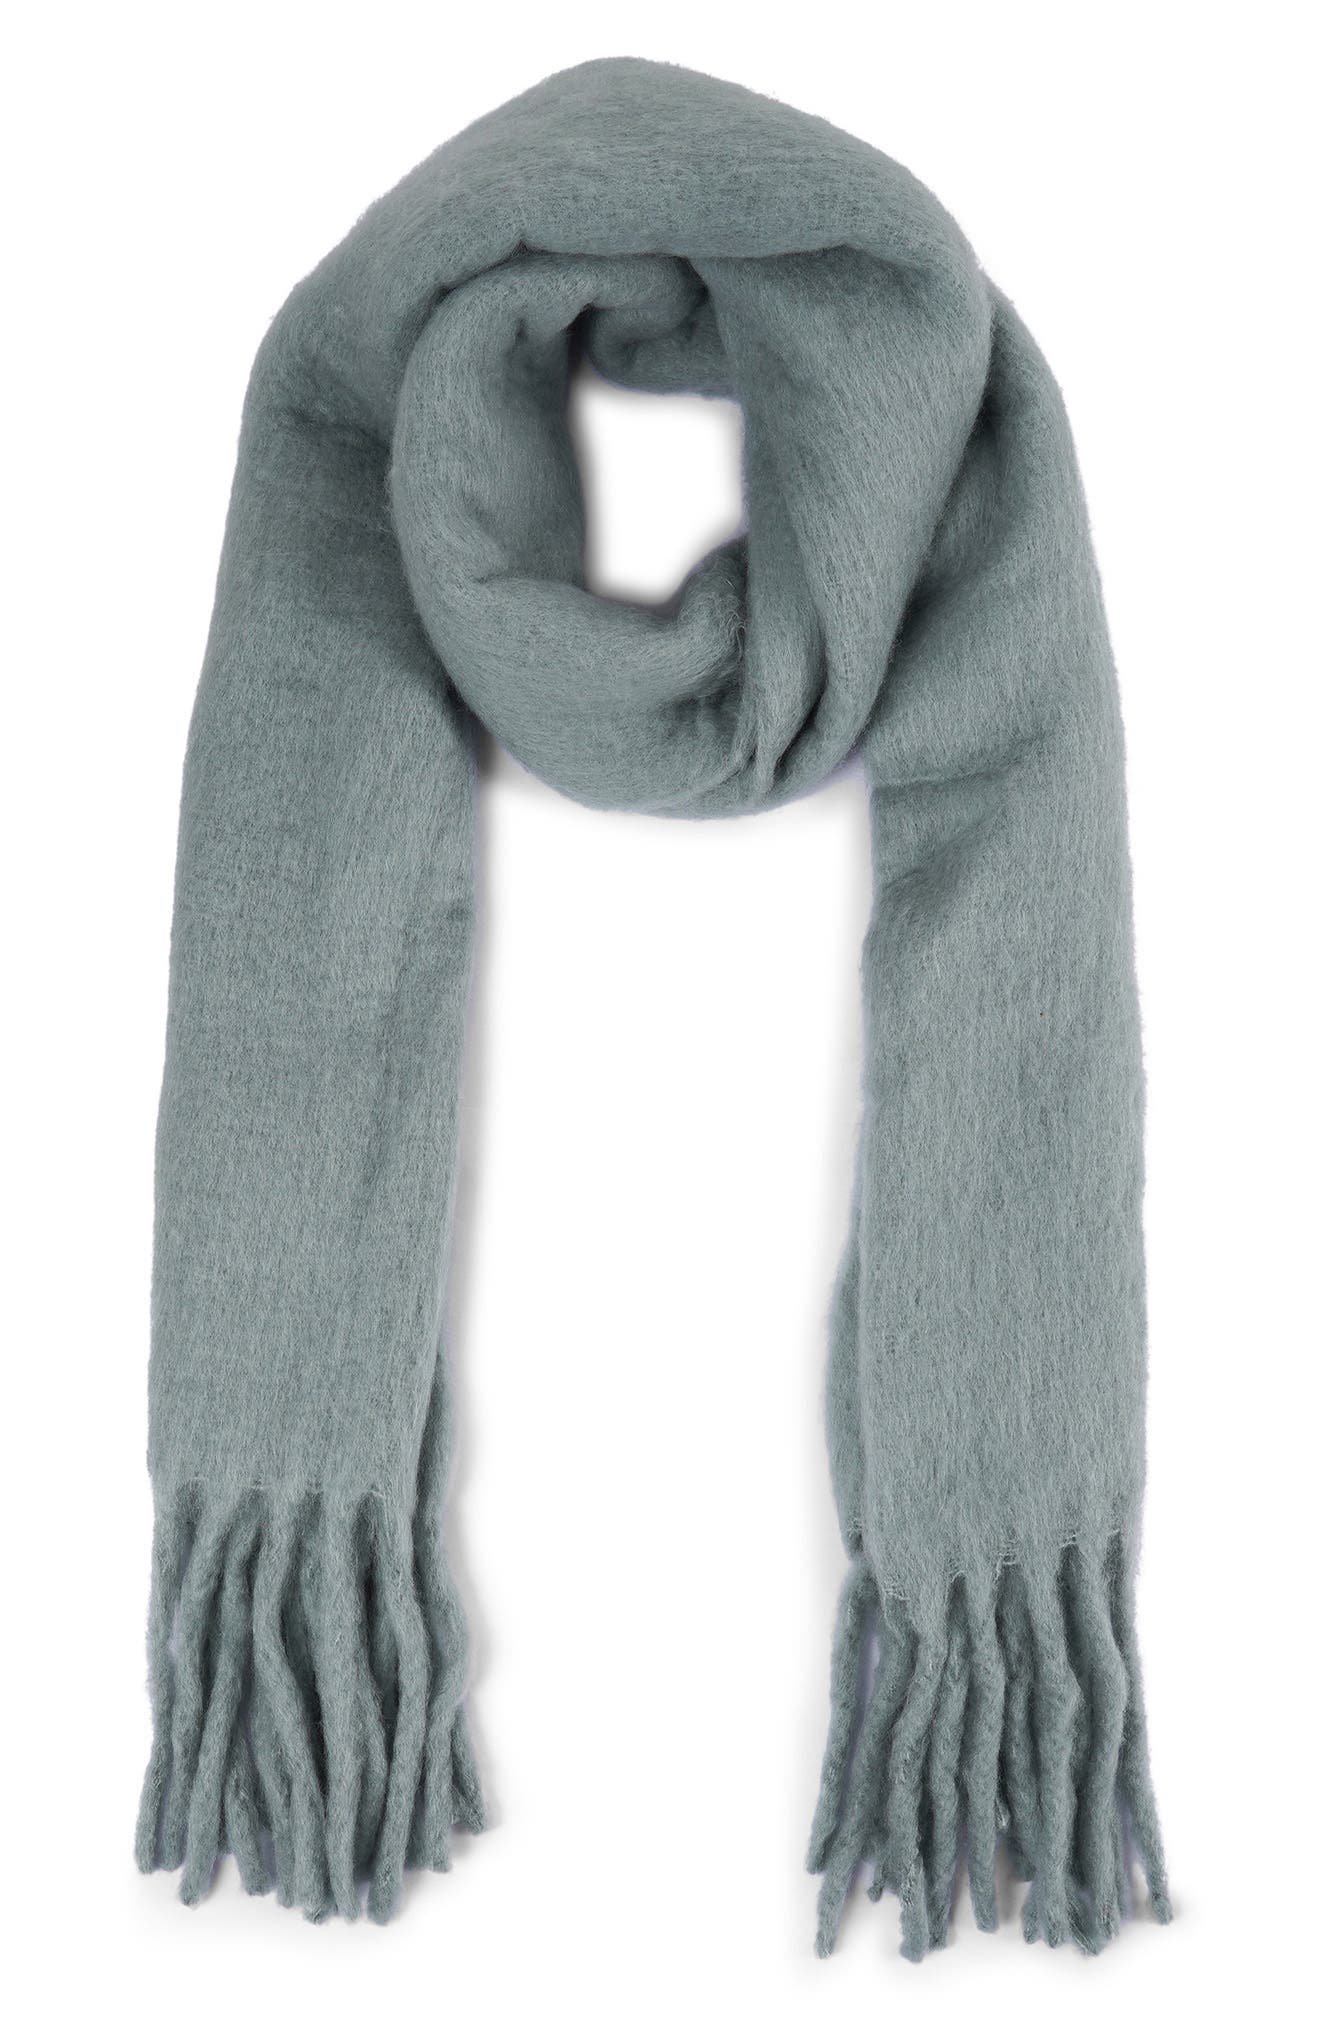 Rebecca Minkoff Woven Blanket Scarf in Heather Grey at Nordstrom